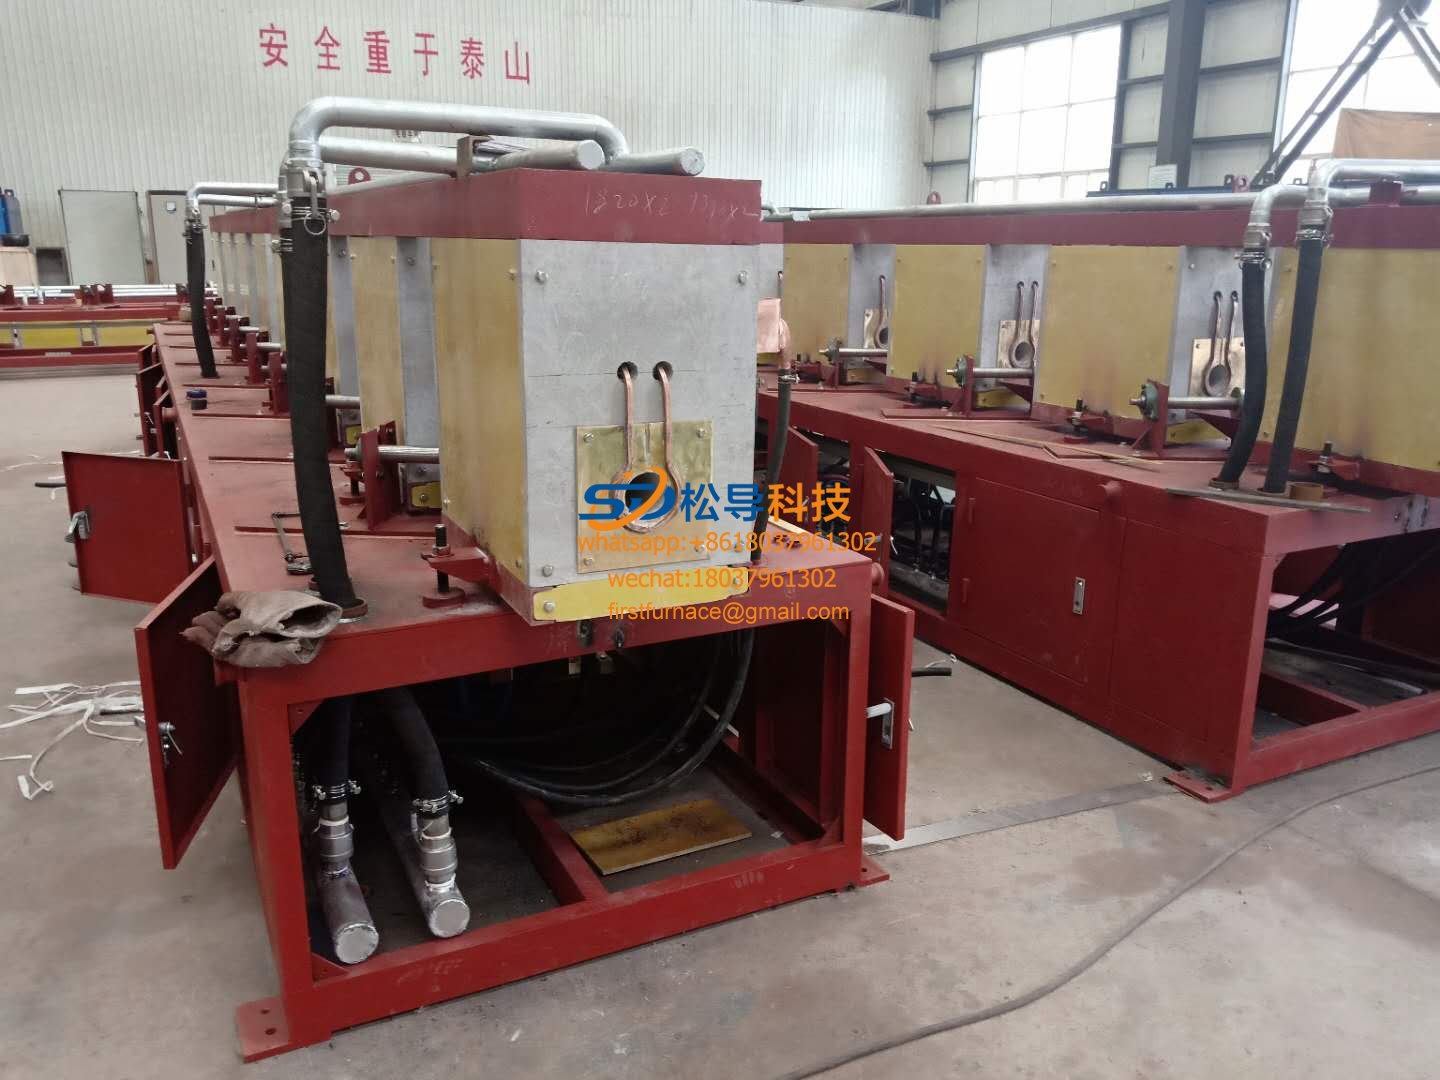 Copper tube medium frequency induction annealing furnace